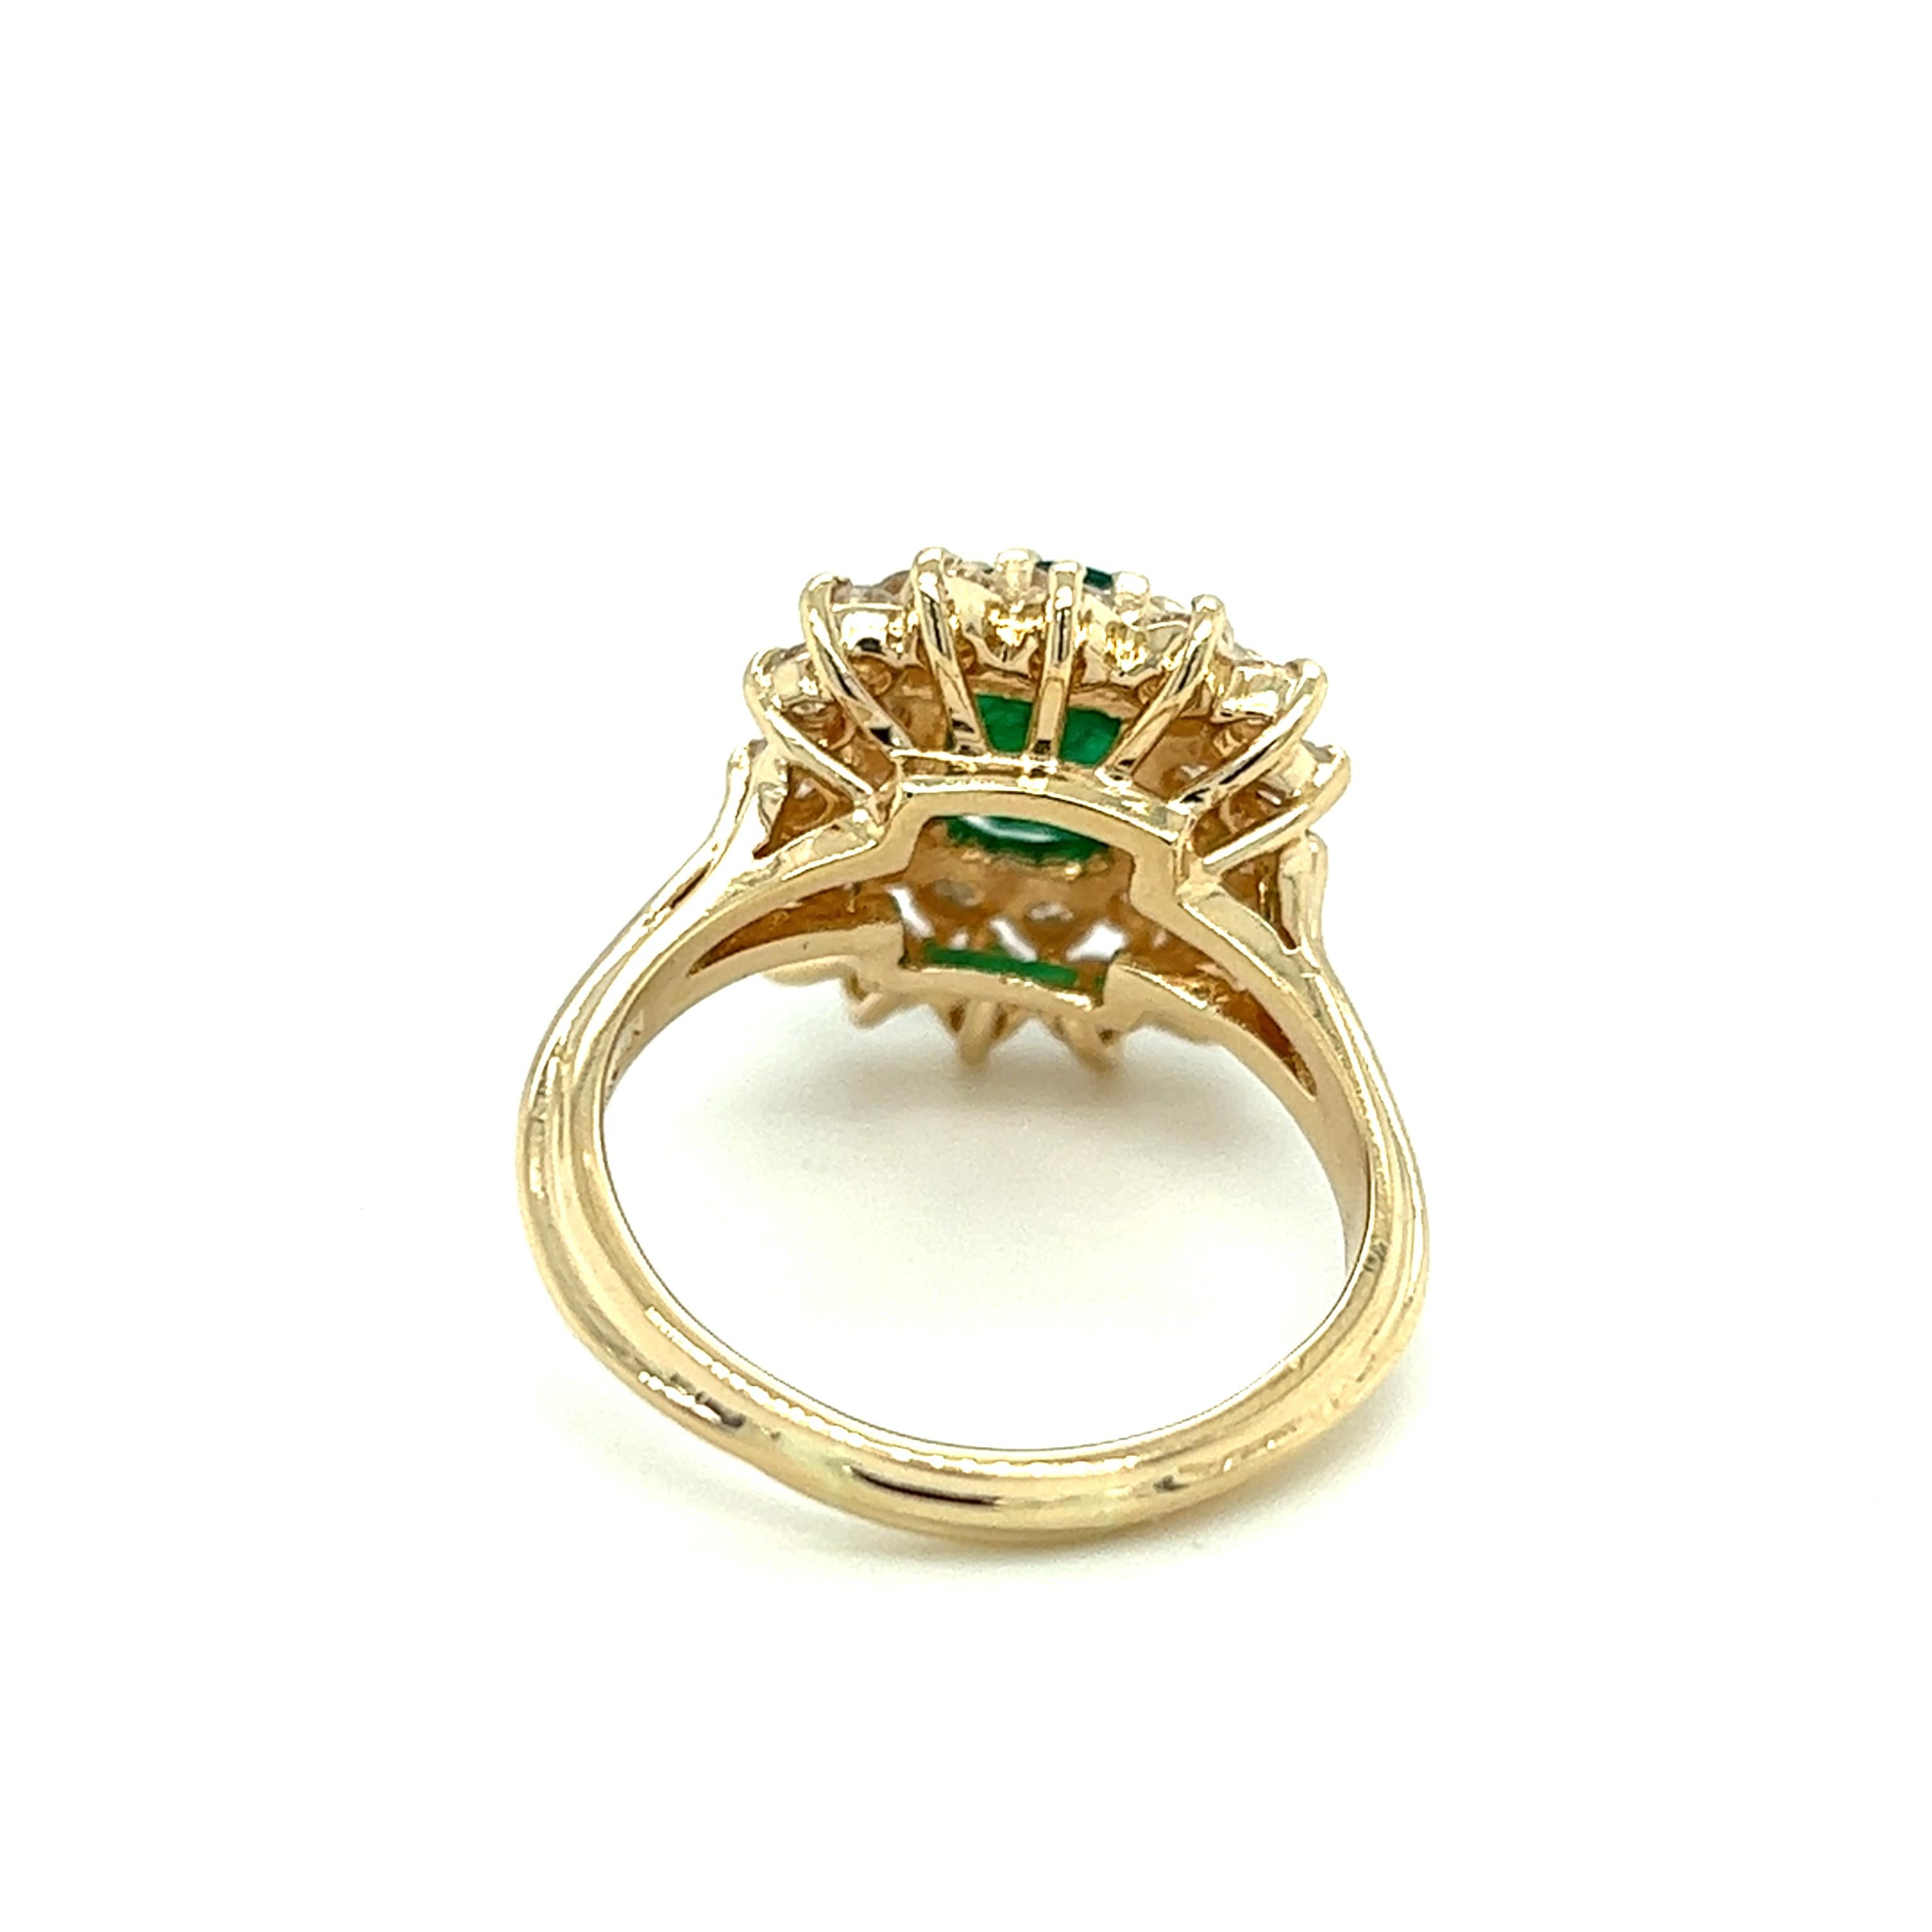 One 14 karat yellow gold cushion shaped cluster ring set with one (1) 1.89 carat oval natural emerald and twenty-eight (28) round brilliant cut diamonds, approximately 1.54 carat total weight with matching H/I color and SI1 clarity. The ring is a